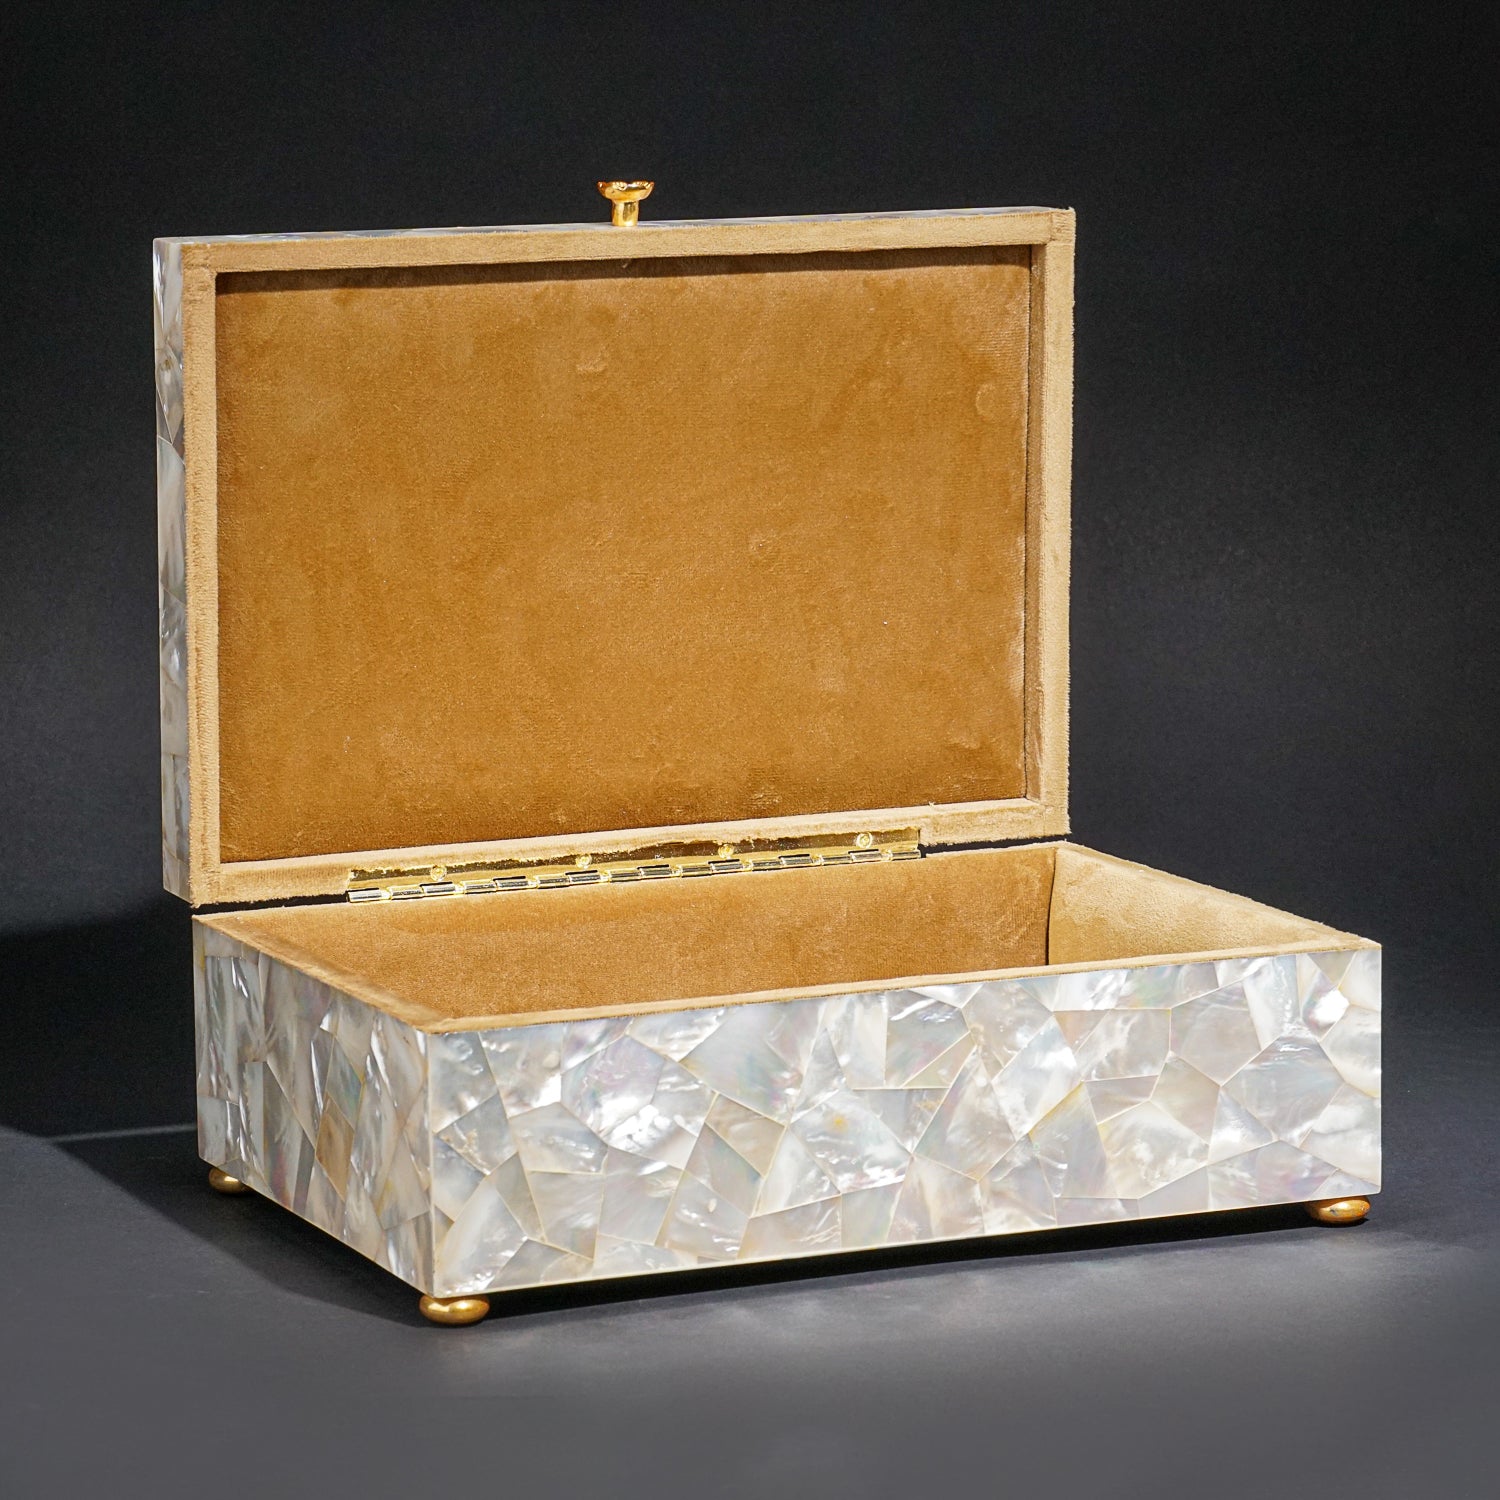 Genuine Large Mother of Pearl Jewelry Box (9.5 lbs)